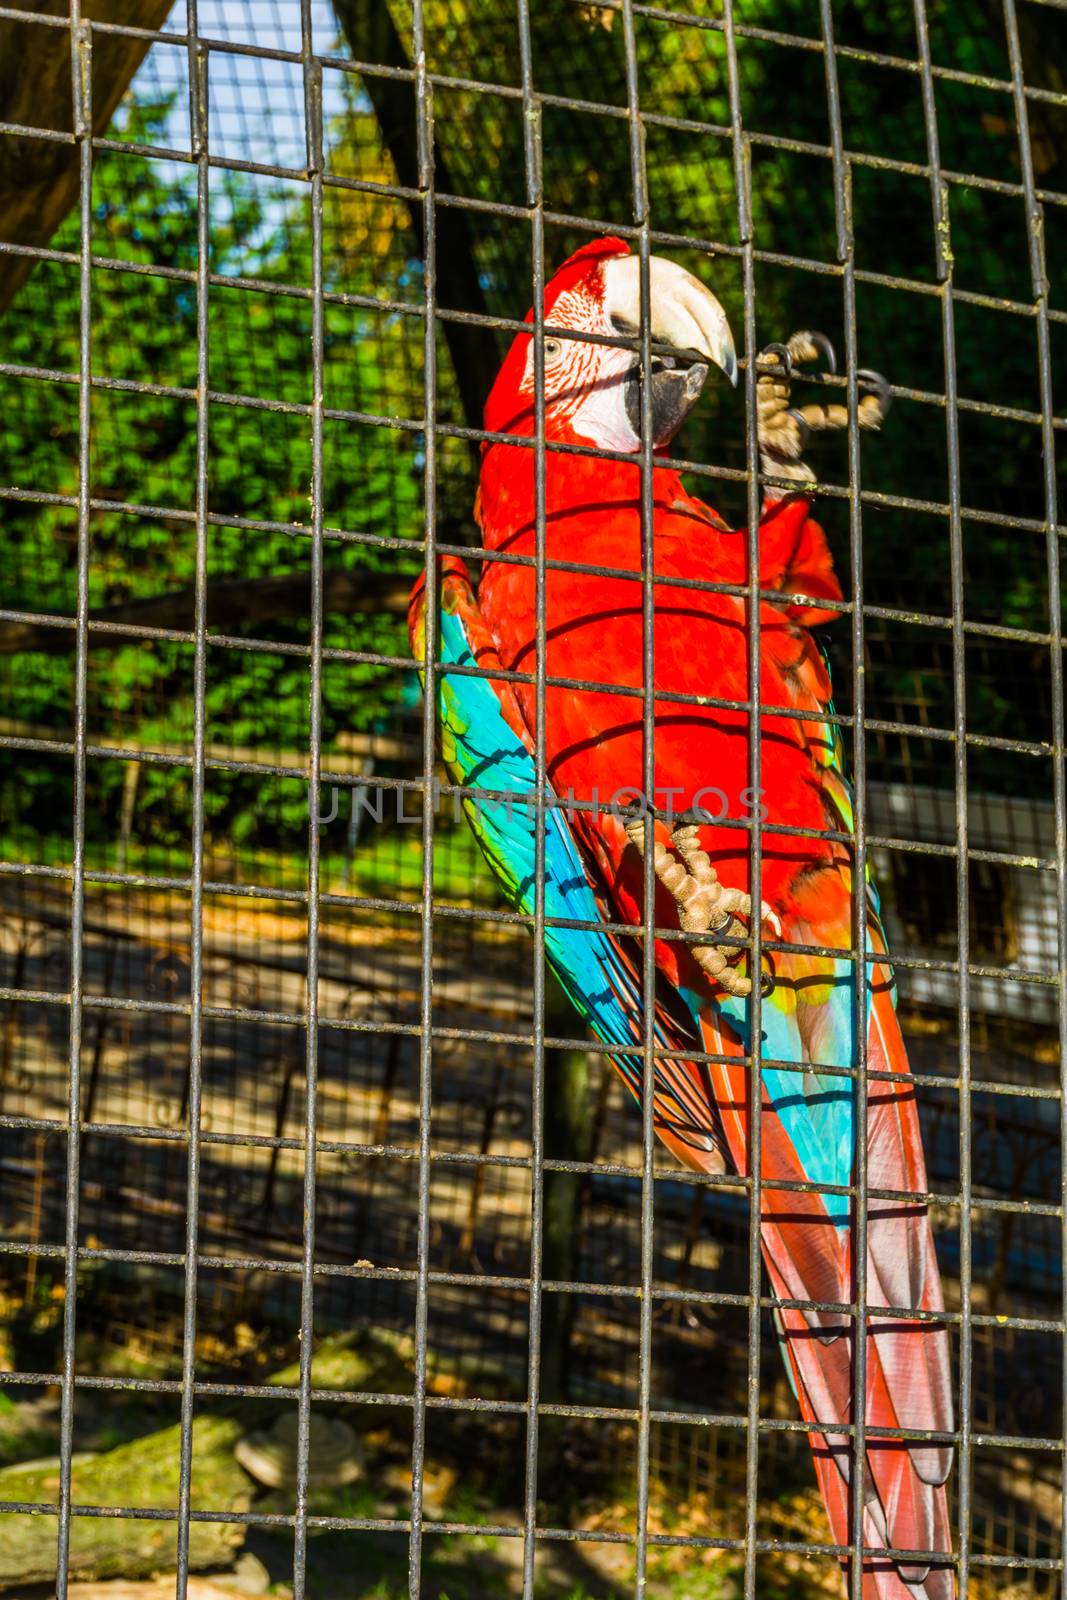 red and green macaw parrot sitting against the fence of the aviary, tropical bird from America, popular pet in aviculture by charlottebleijenberg